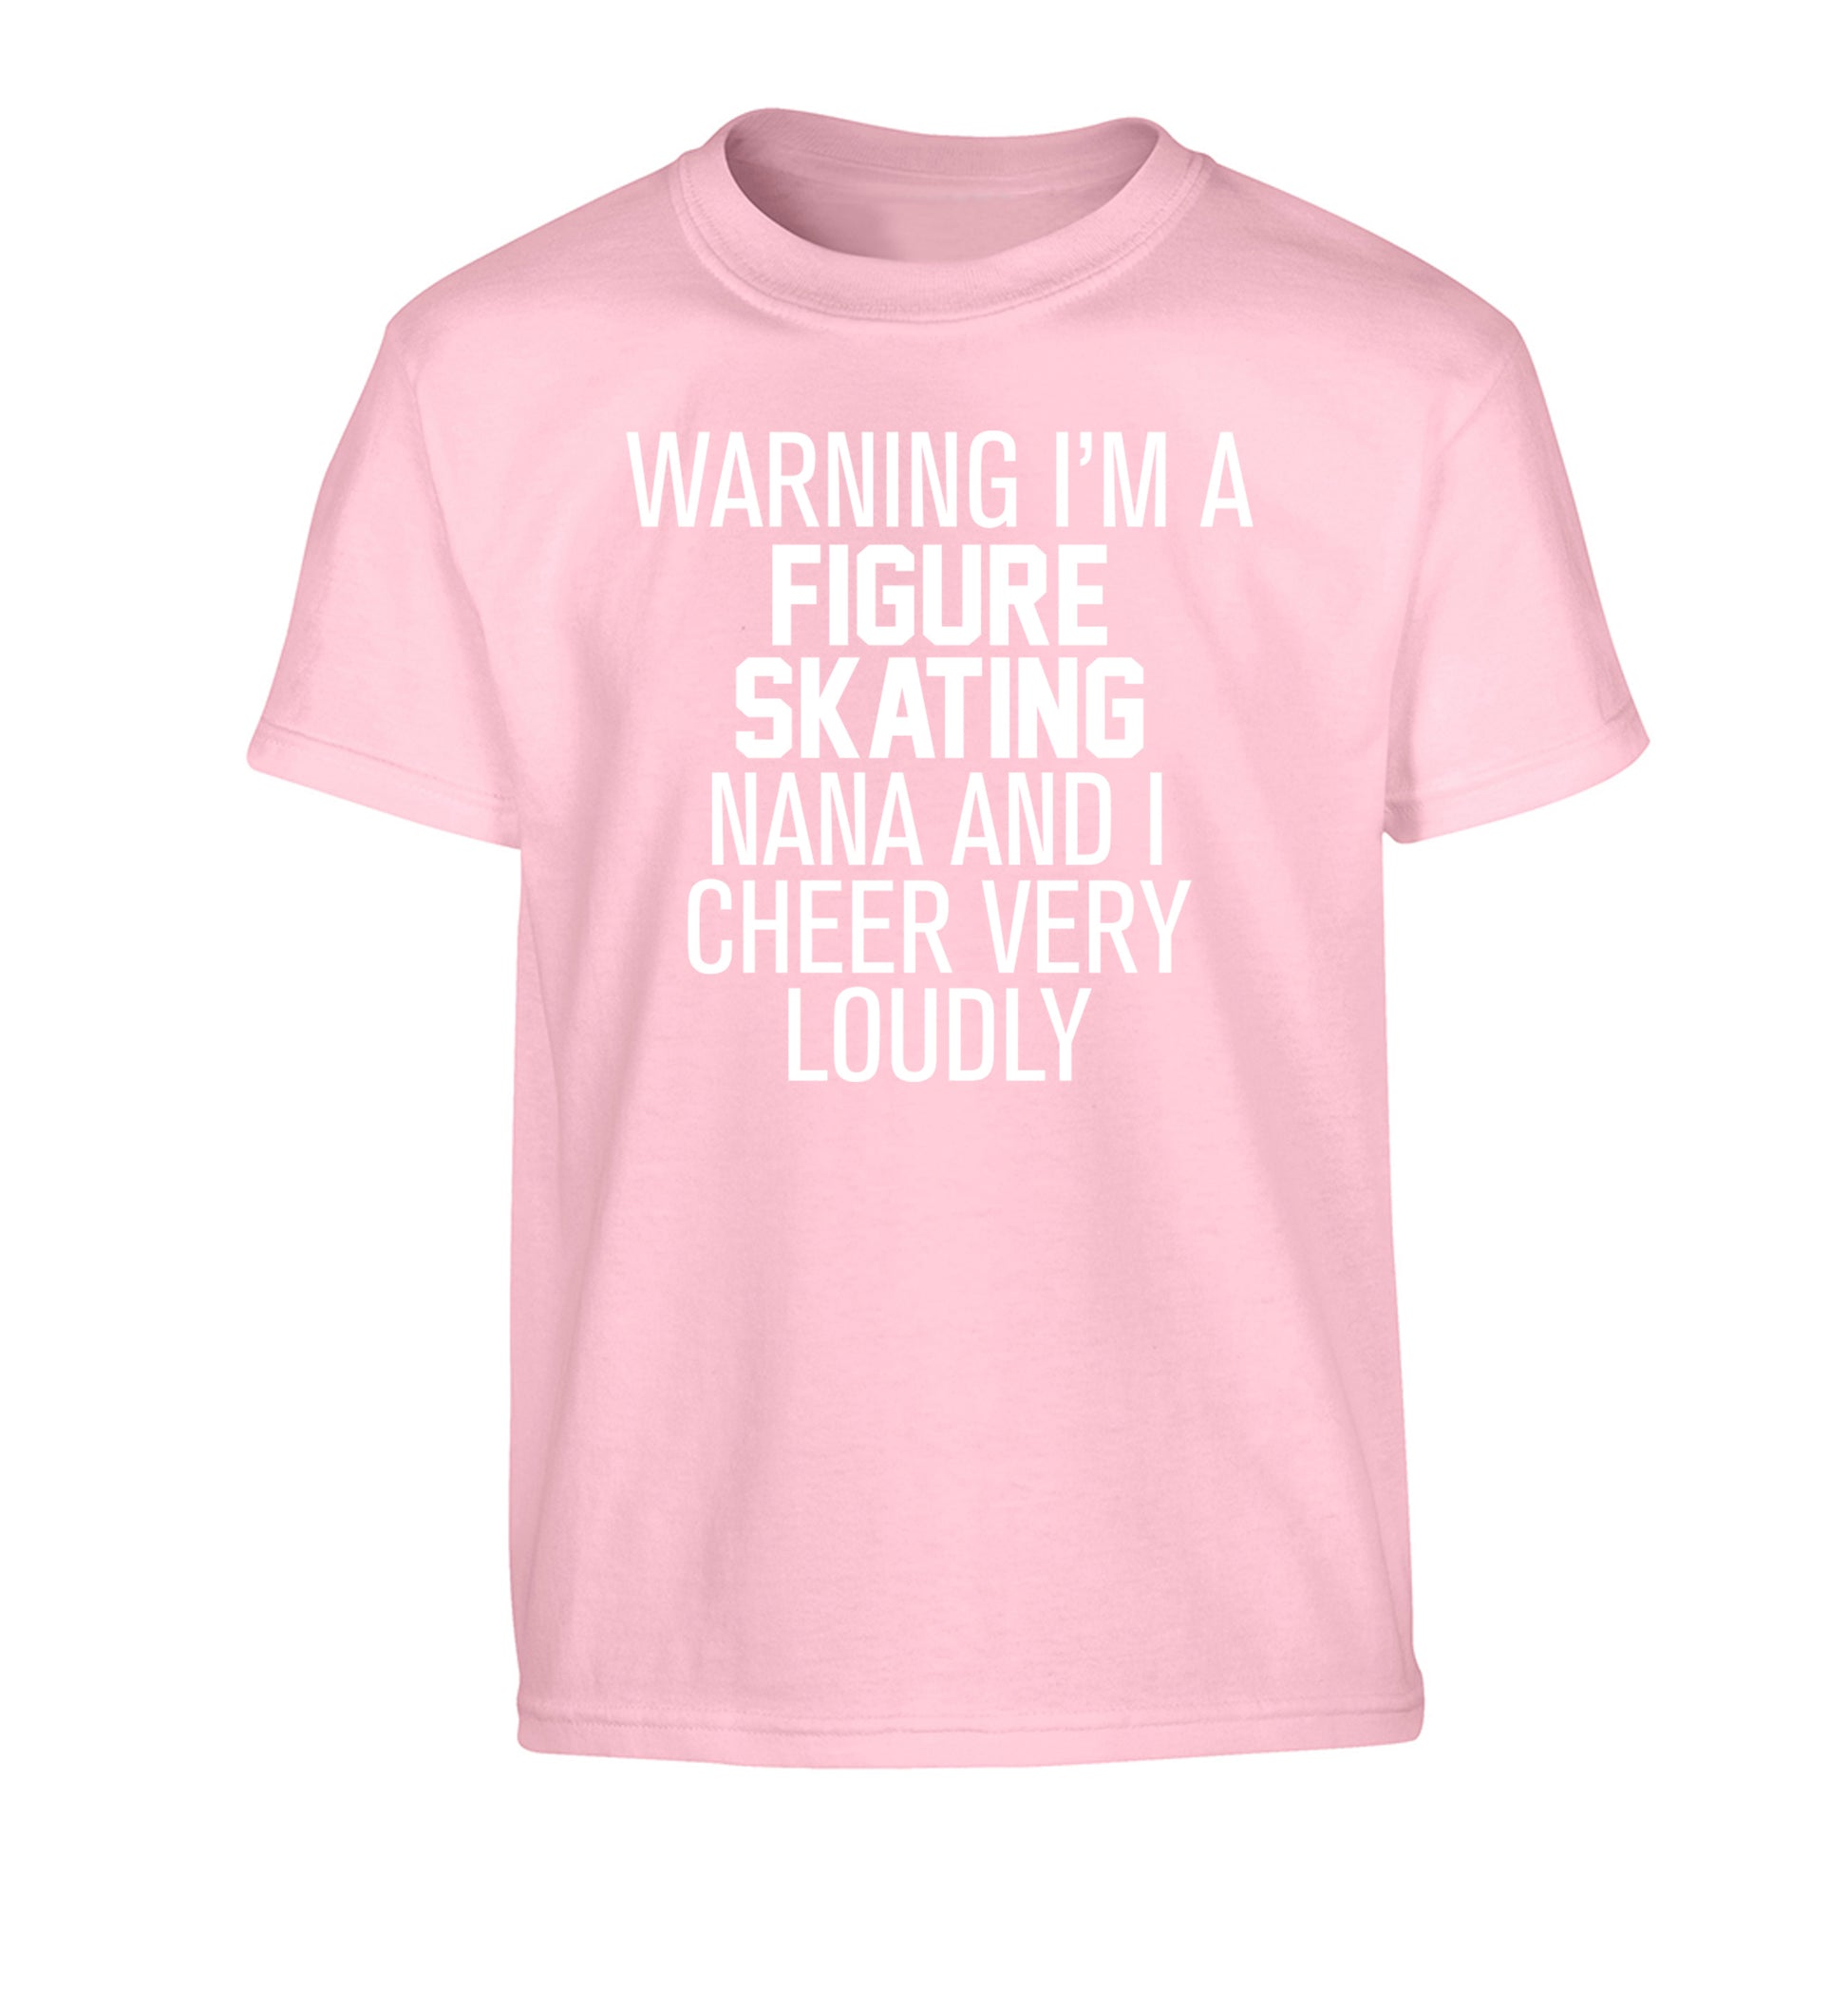 Warning I'm a figure skating nana and I cheer very loudly Children's light pink Tshirt 12-14 Years